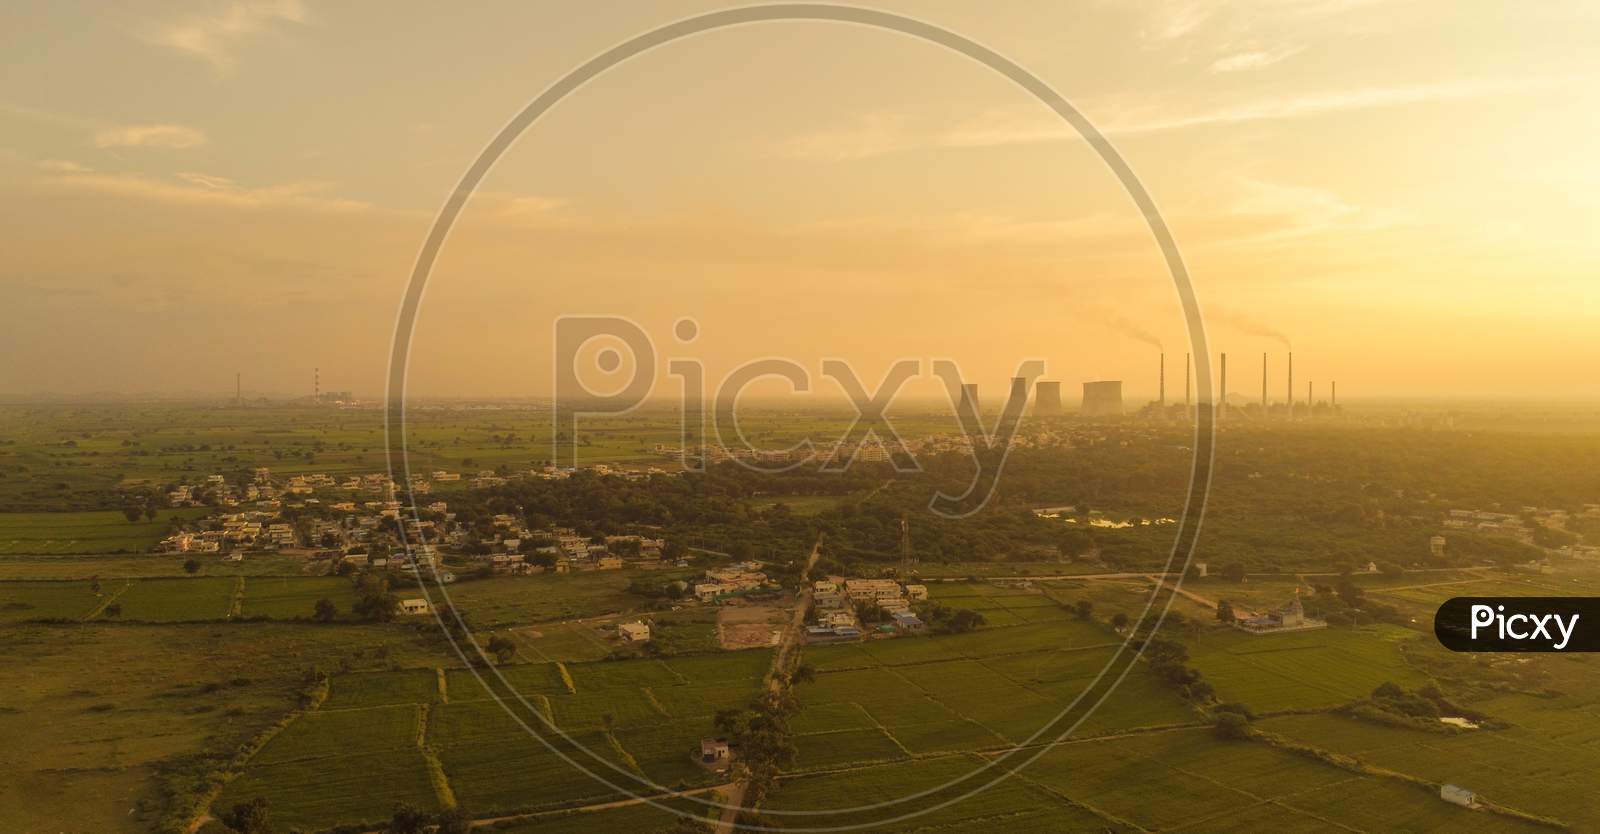 Aerial View Of Coal Power Plant - Sunrise Near Green Agriculture Field With Factories Outside The City, Raichur, India